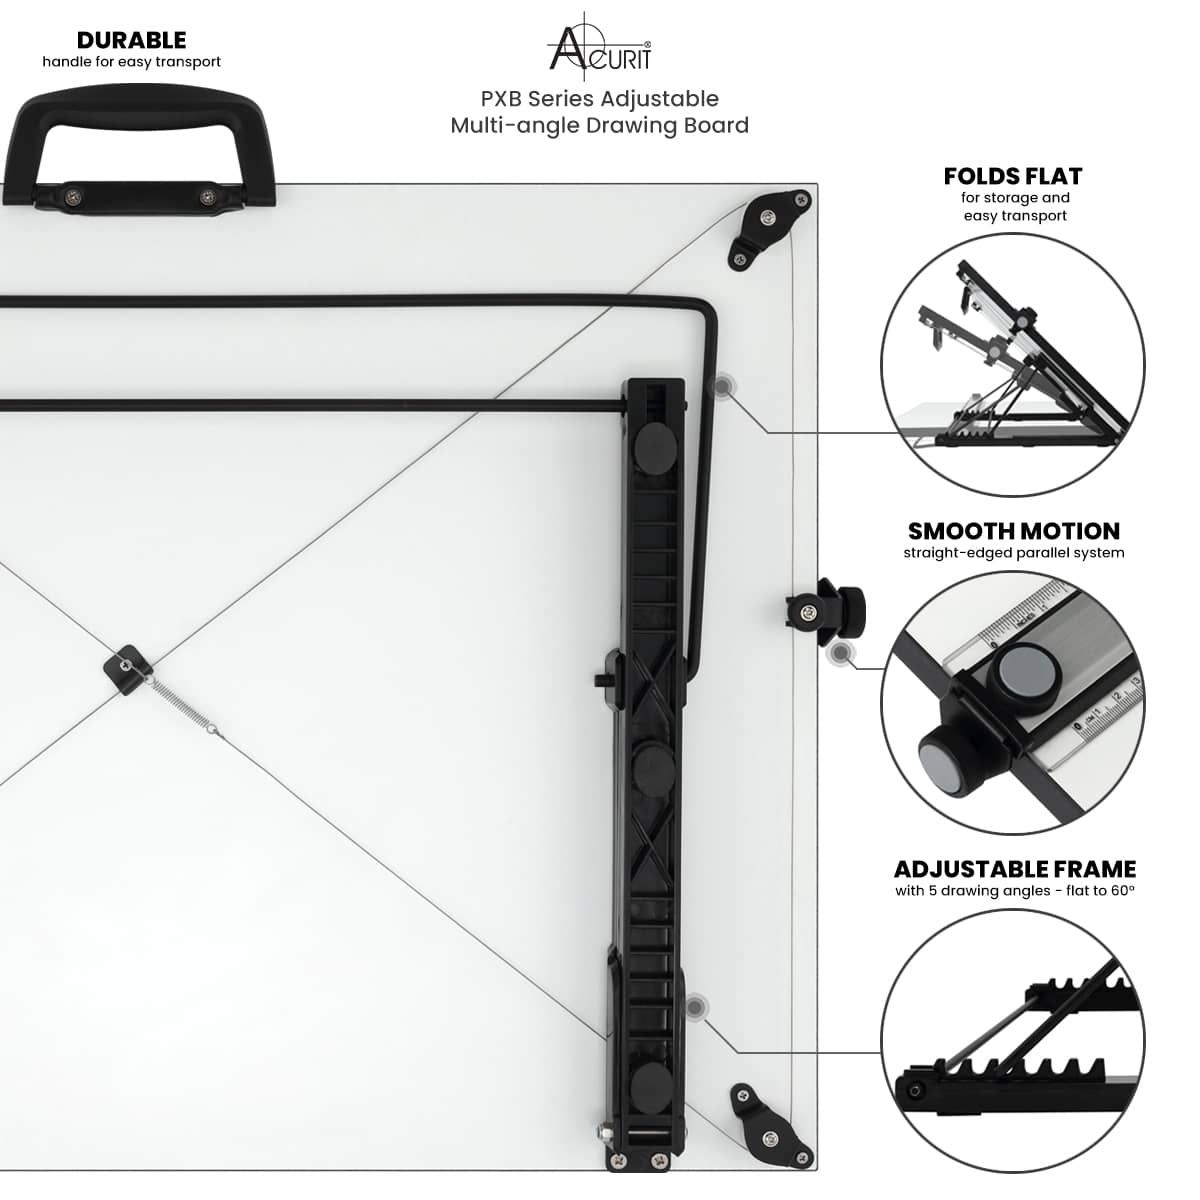 Multi-Angle PXB Drawing Board features